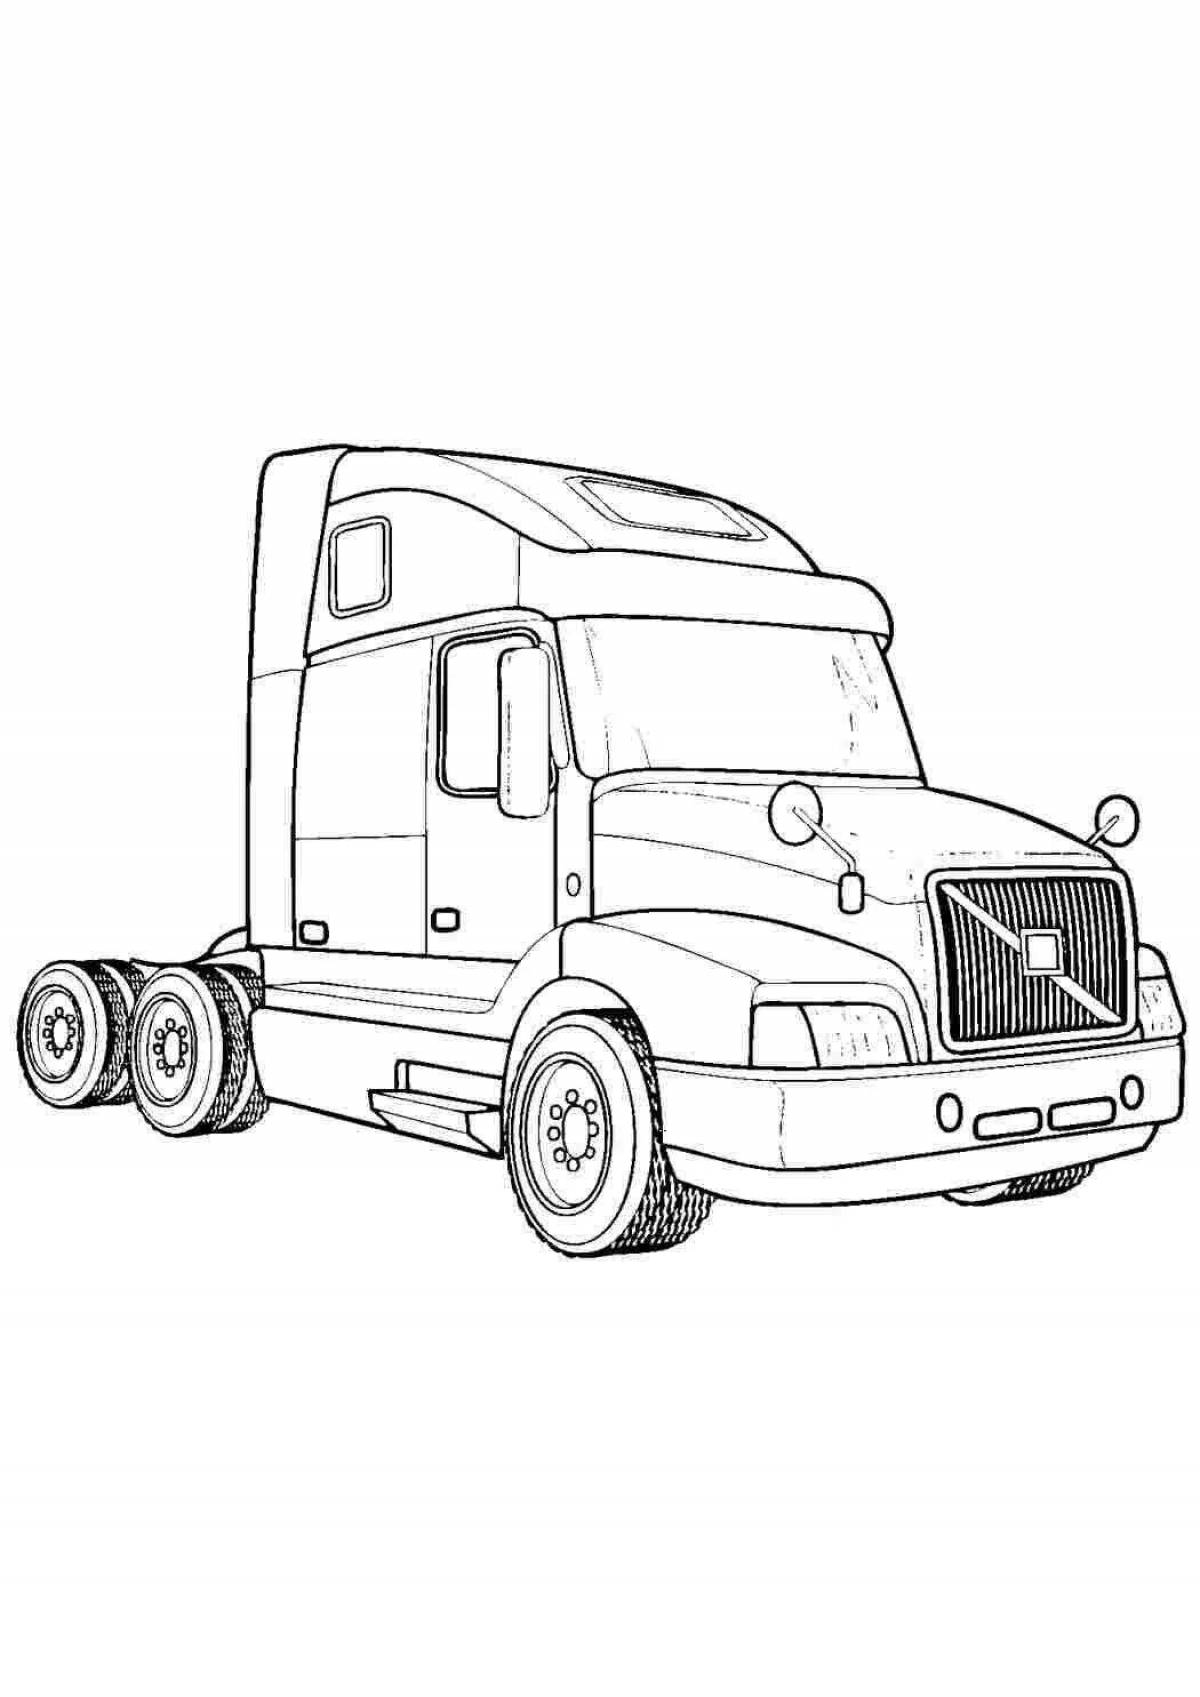 Amazing truck coloring page for 6-7 year olds